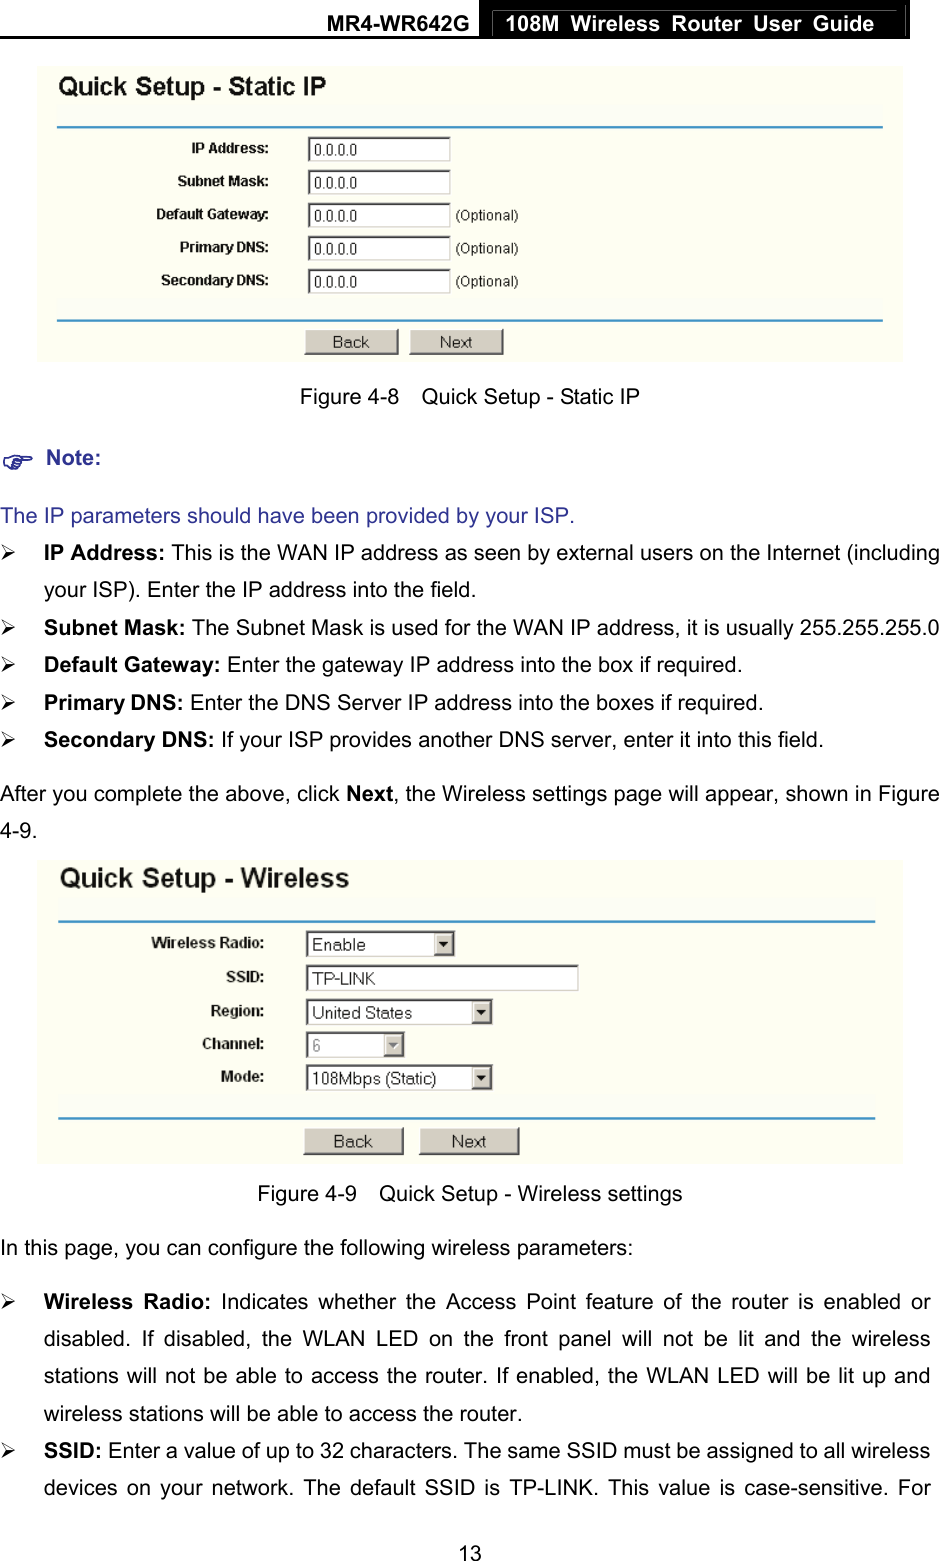 MR4-WR642G 108M Wireless Router User Guide   13 Figure 4-8    Quick Setup - Static IP ) Note: The IP parameters should have been provided by your ISP. ¾ IP Address: This is the WAN IP address as seen by external users on the Internet (including your ISP). Enter the IP address into the field. ¾ Subnet Mask: The Subnet Mask is used for the WAN IP address, it is usually 255.255.255.0 ¾ Default Gateway: Enter the gateway IP address into the box if required. ¾ Primary DNS: Enter the DNS Server IP address into the boxes if required. ¾ Secondary DNS: If your ISP provides another DNS server, enter it into this field. After you complete the above, click Next, the Wireless settings page will appear, shown in Figure 4-9.  Figure 4-9    Quick Setup - Wireless settings In this page, you can configure the following wireless parameters: ¾ Wireless Radio:  Indicates whether the Access Point feature of the router is enabled or disabled. If disabled, the WLAN LED on the front panel will not be lit and the wireless stations will not be able to access the router. If enabled, the WLAN LED will be lit up and wireless stations will be able to access the router. ¾ SSID: Enter a value of up to 32 characters. The same SSID must be assigned to all wireless devices on your network. The default SSID is TP-LINK. This value is case-sensitive. For 